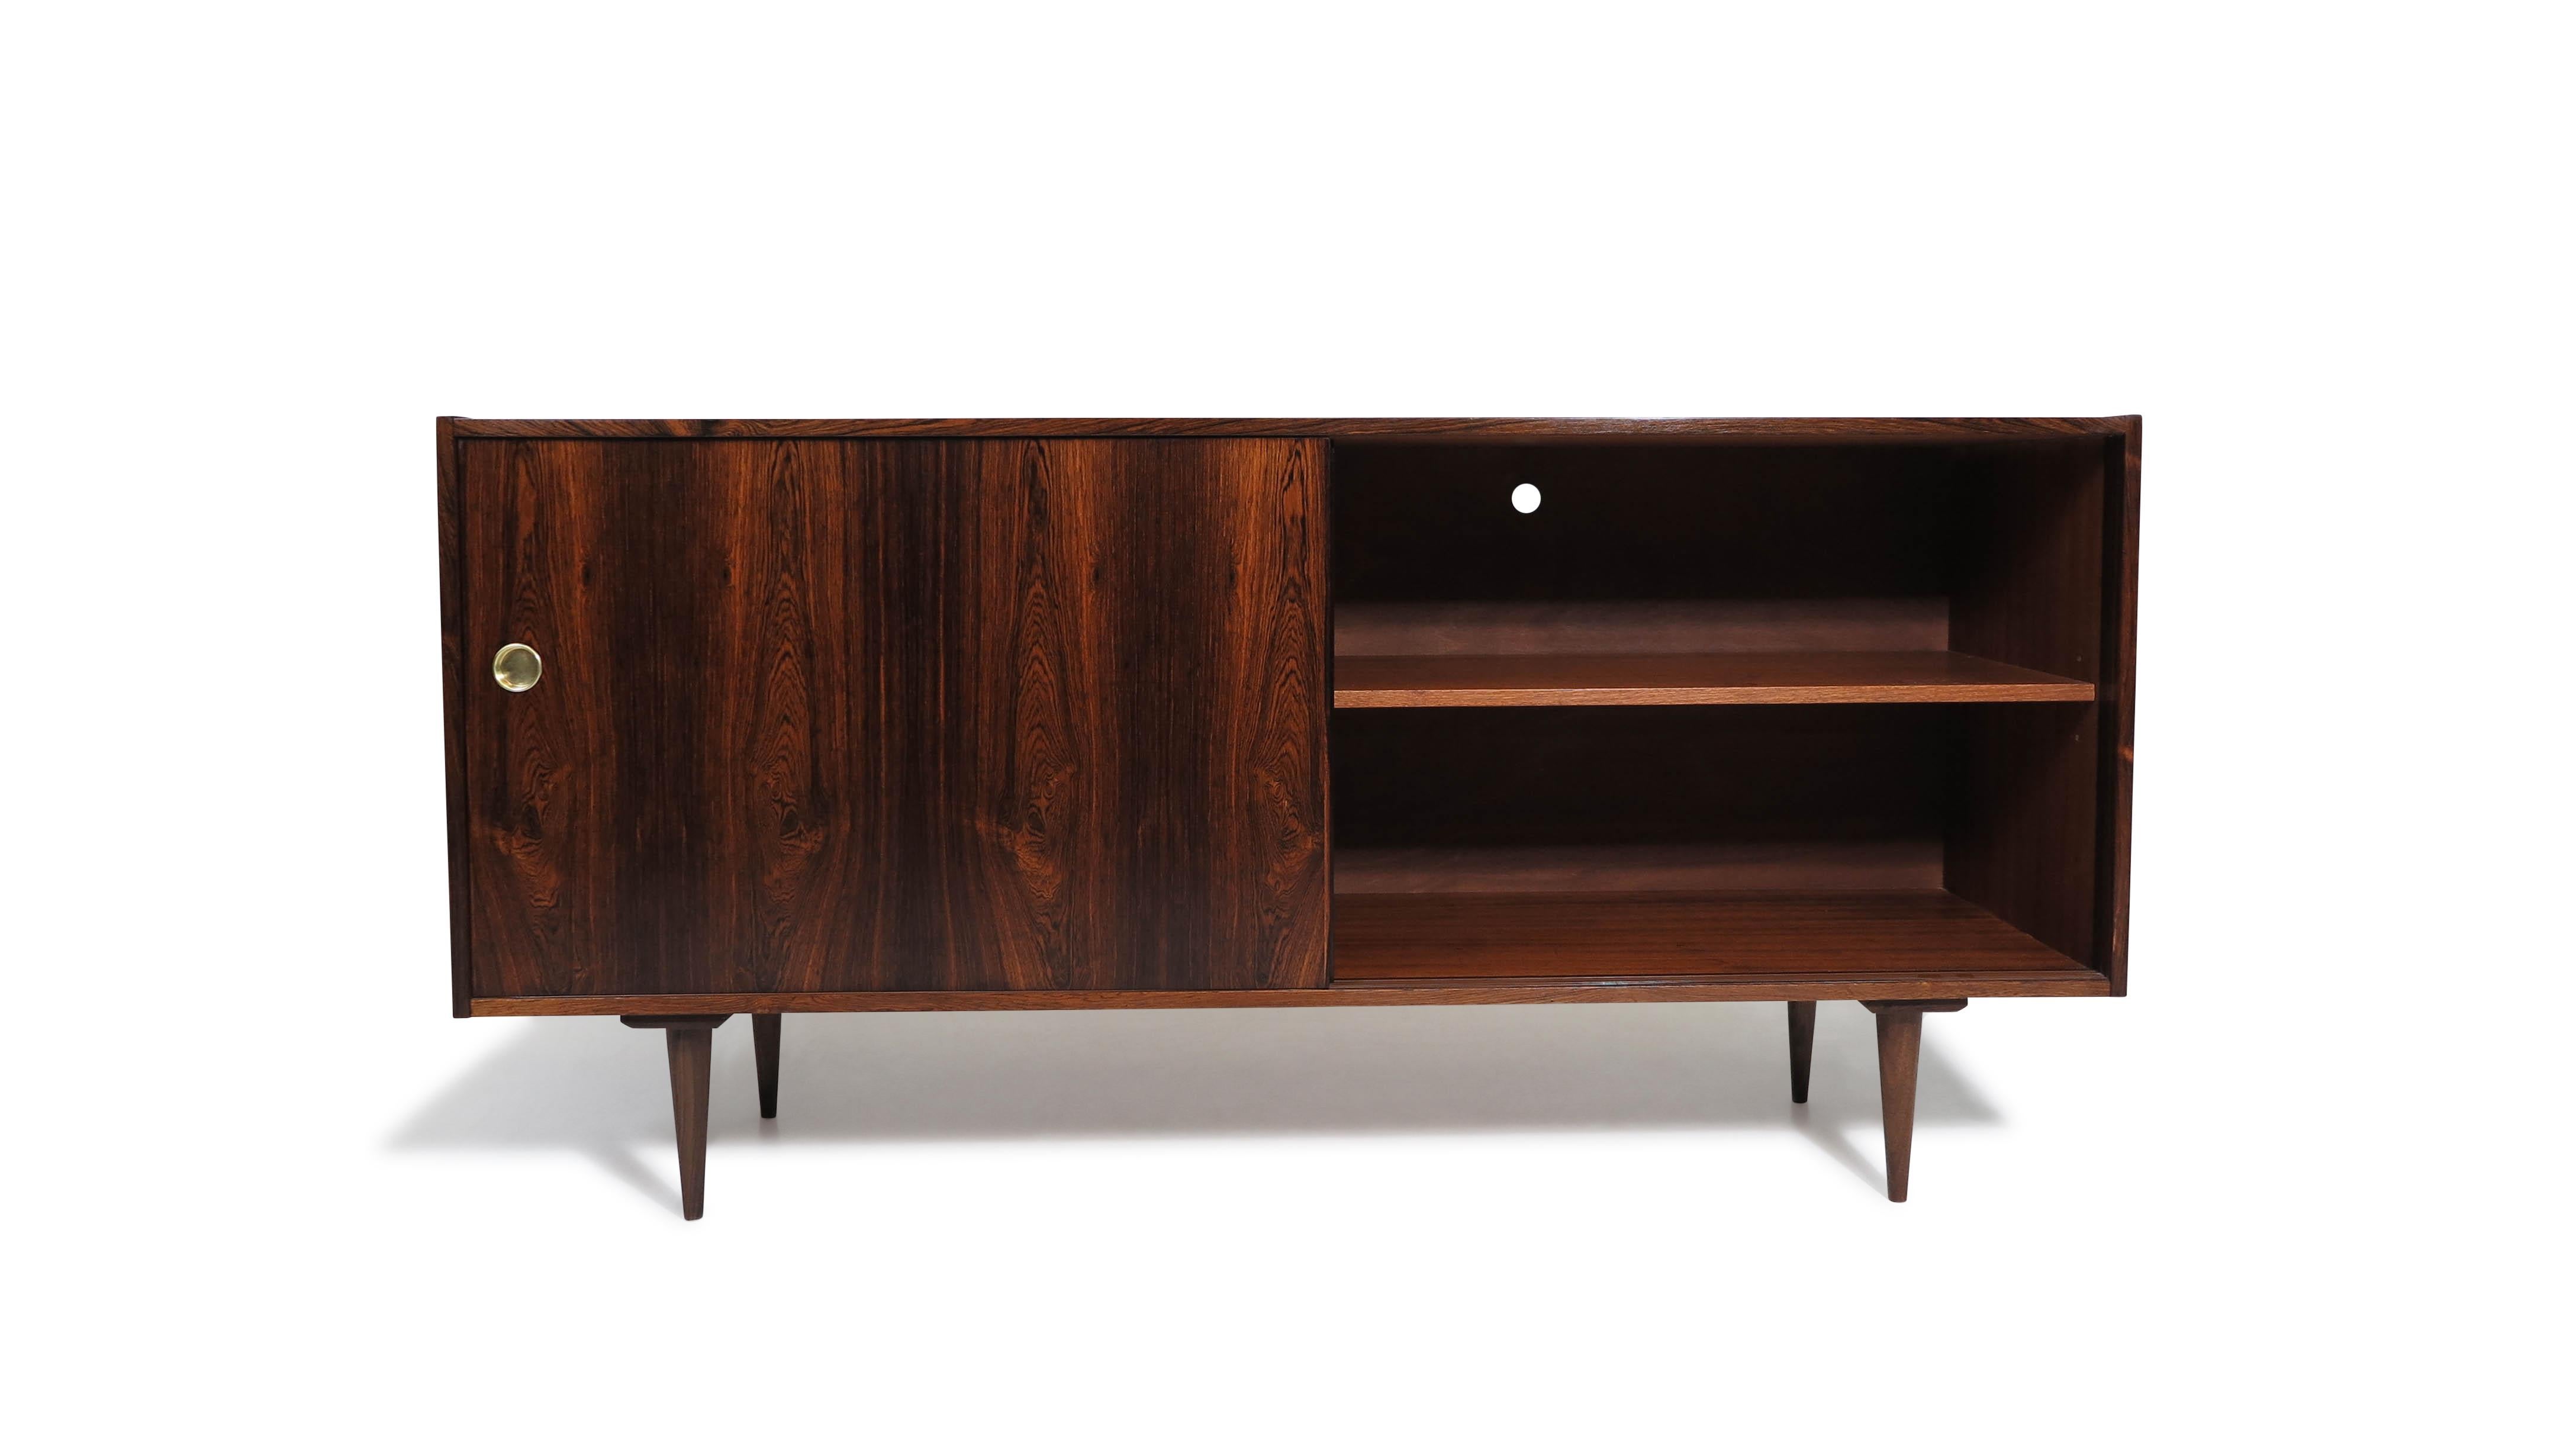 Mid-century Scandinavian sideboard crafted from Brazilian rosewood, featuring book-matched grain across a pair of sliding doors with recessed brass pulls. Raised on round tapered legs, the cabinet interior is made of Cuban mahogany and includes